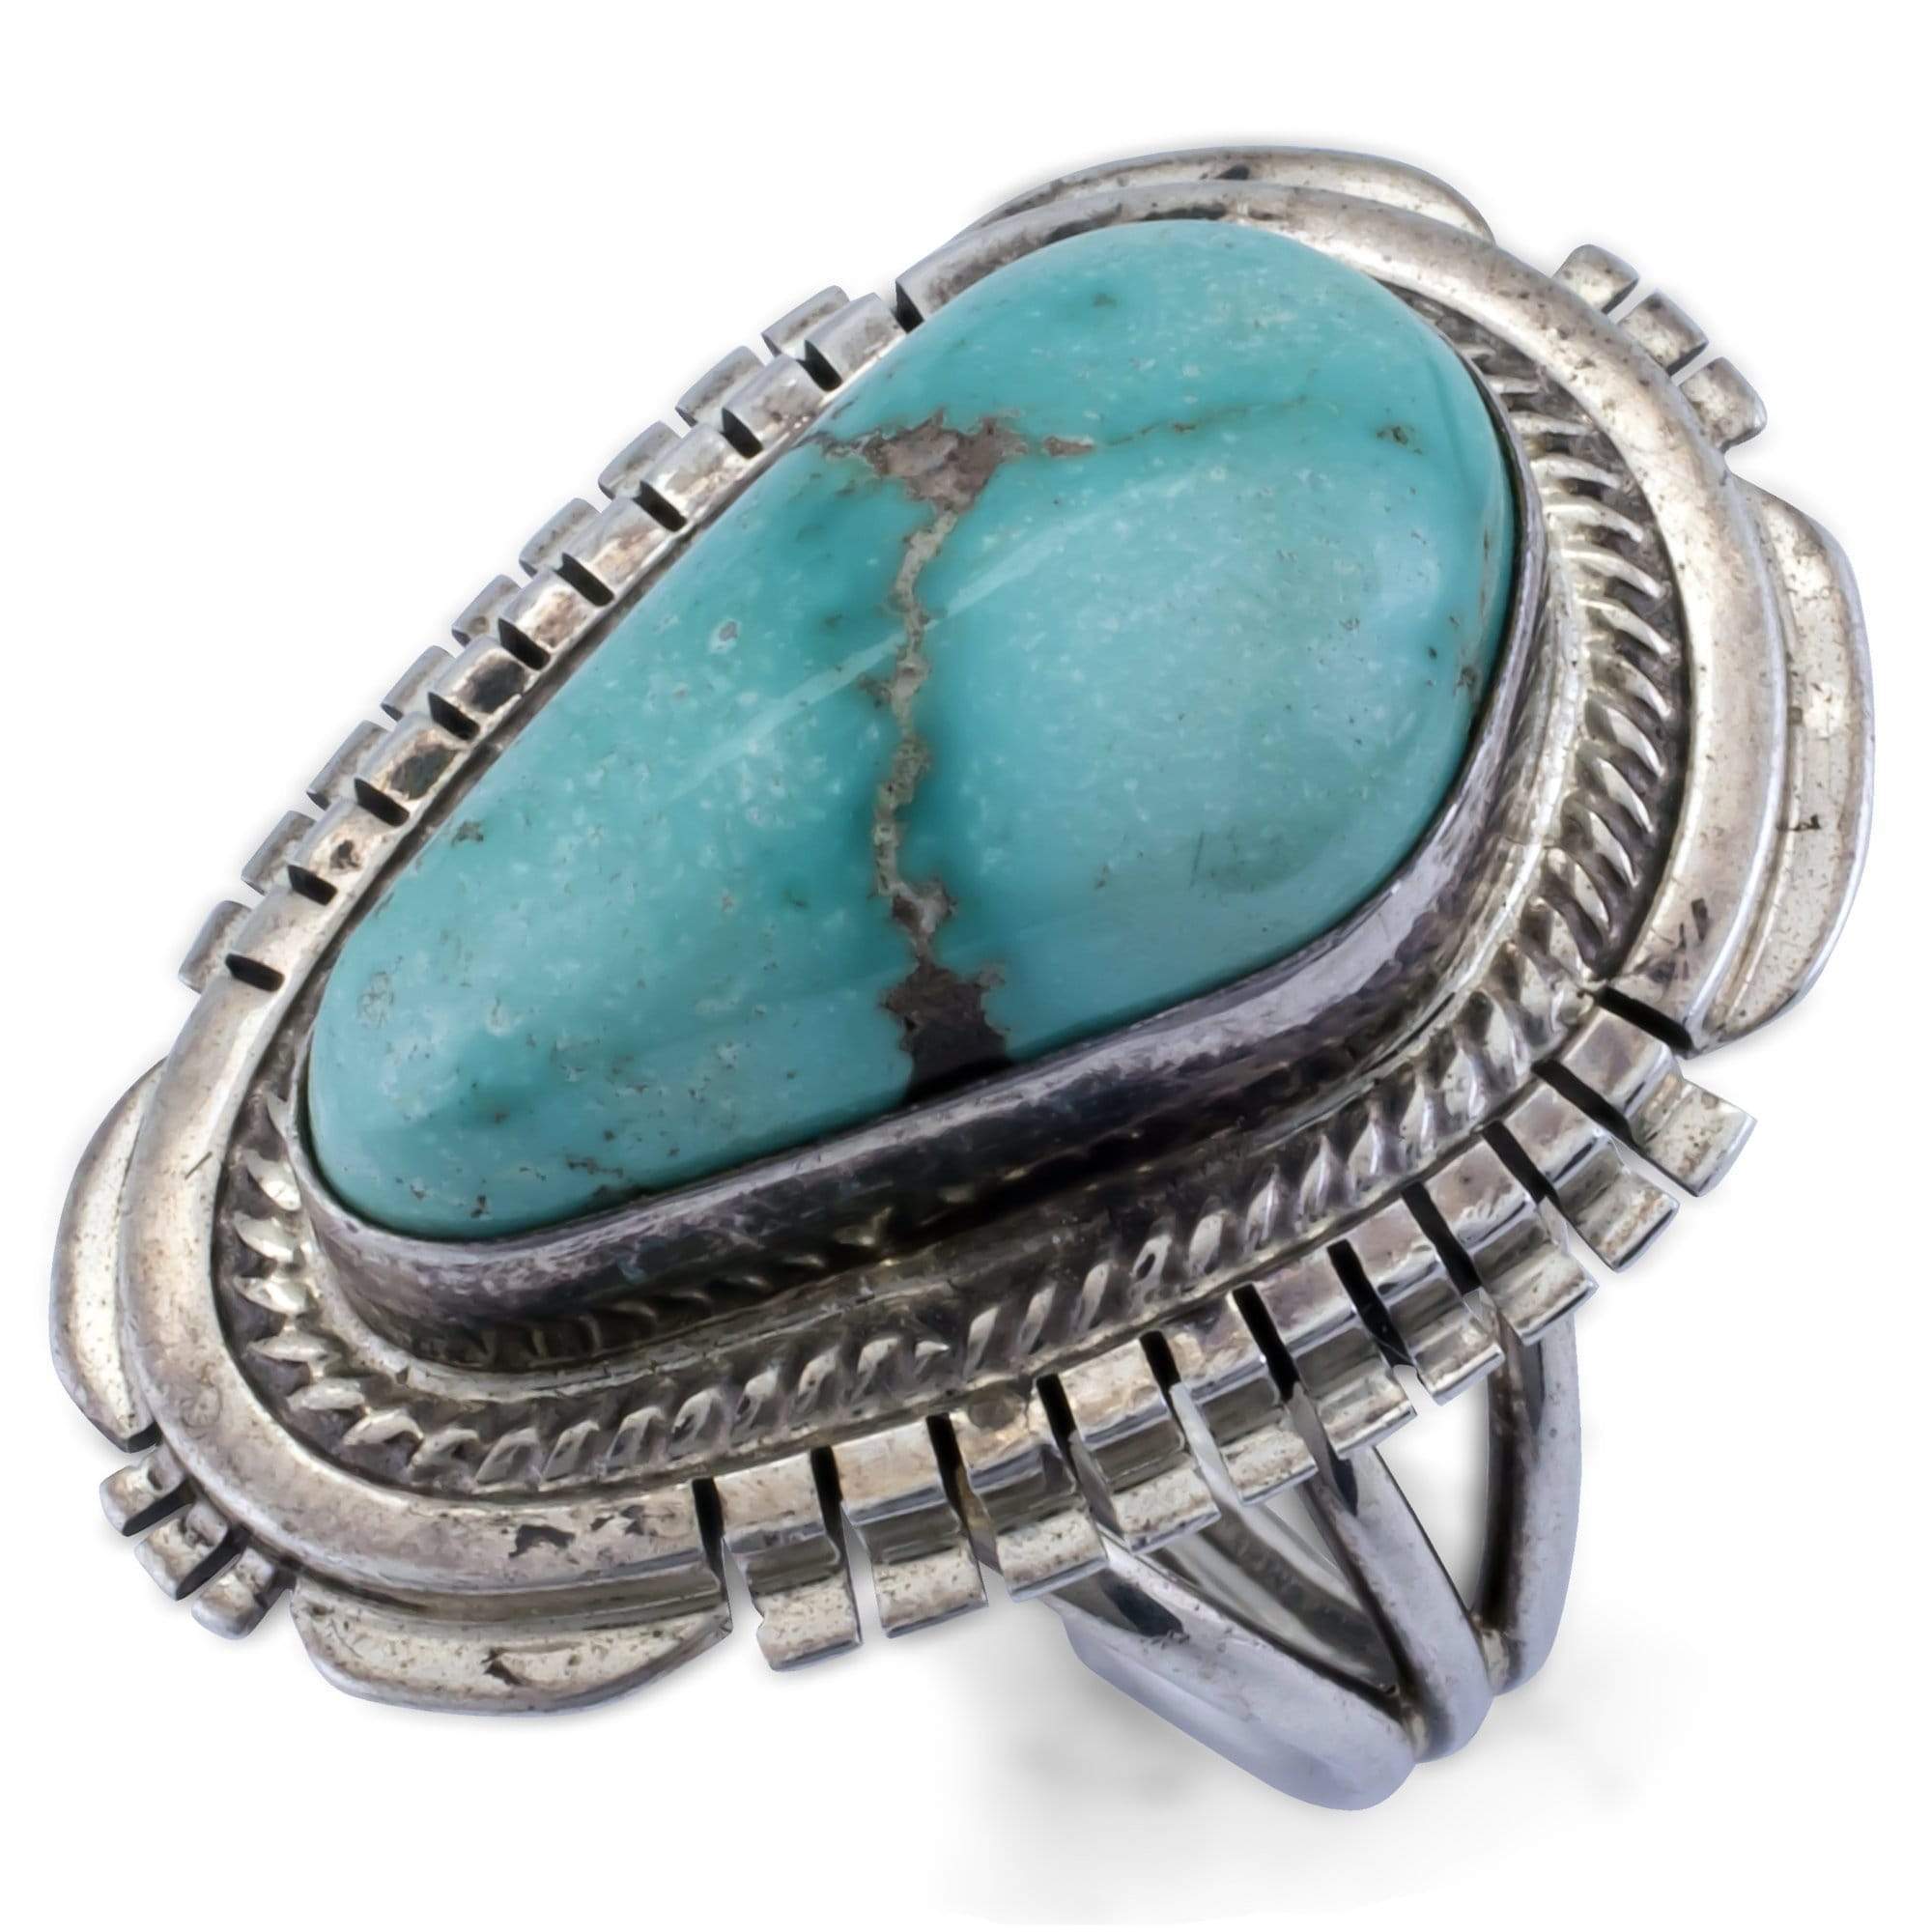 Kalifano Native American Jewelry 5 Kevin Willie Fox Turquoise Native American Made 925 Sterling Silver Ring NAR400.016.5